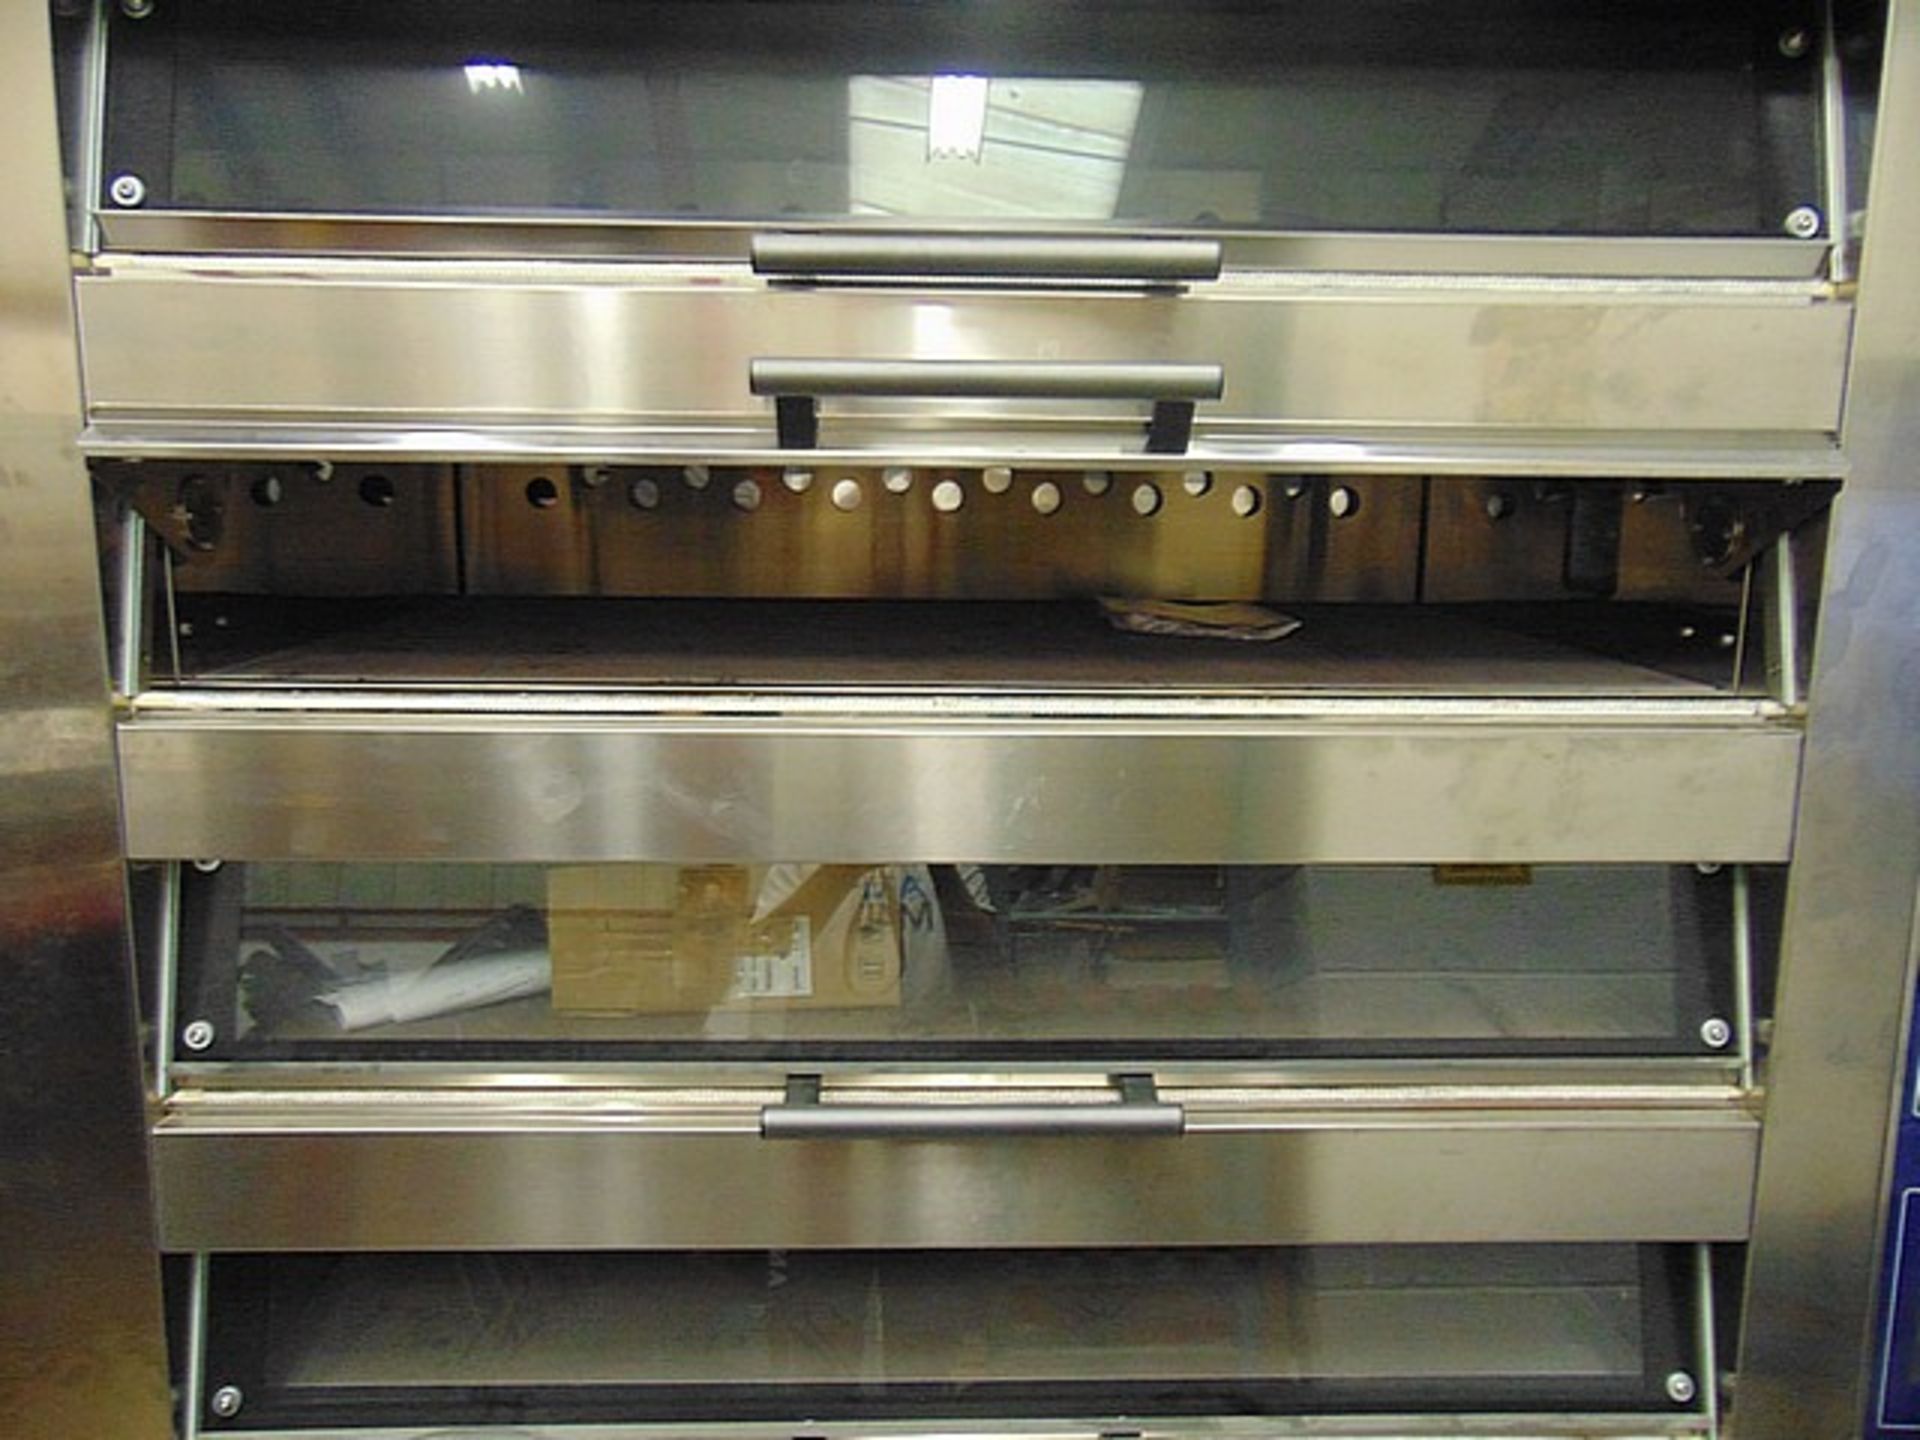 Danziforni model SC3T7646 stainless steel mini deck oven electric year 2003 - Image 5 of 5